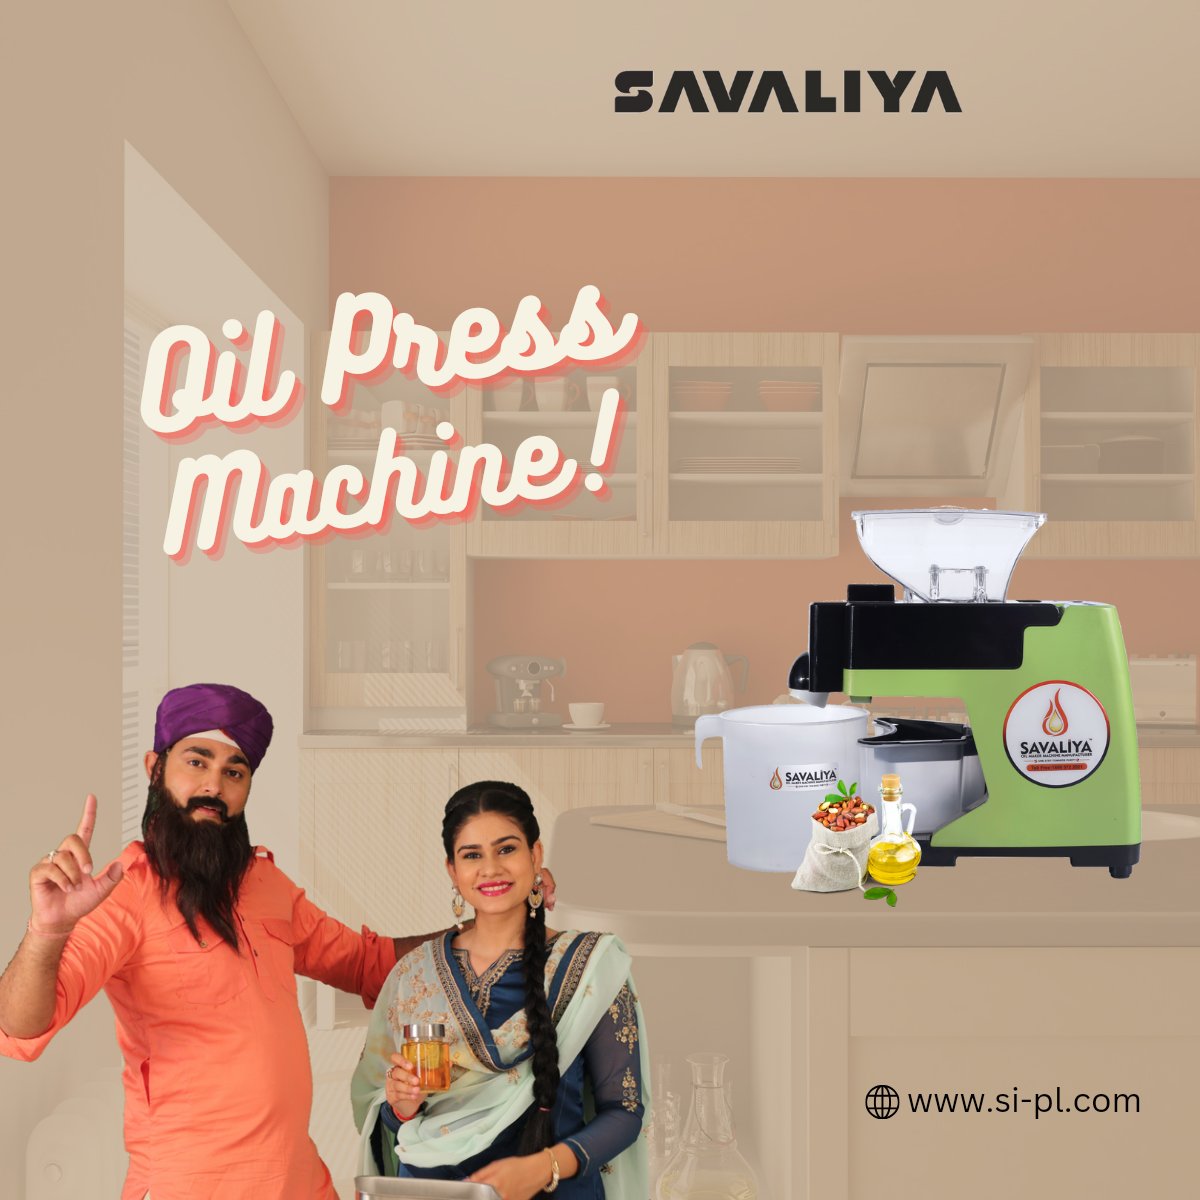 Our compact and lightweight machine is designed to be easily transportable, allowing you to bring it wherever you need it. 

#savaliyaoilmakermachine  #oilmakermachine #oilpressmachine #oilextractionmachine #oilexpeller #OilMakingMachine  #coldpressoilmachine #coldpressed